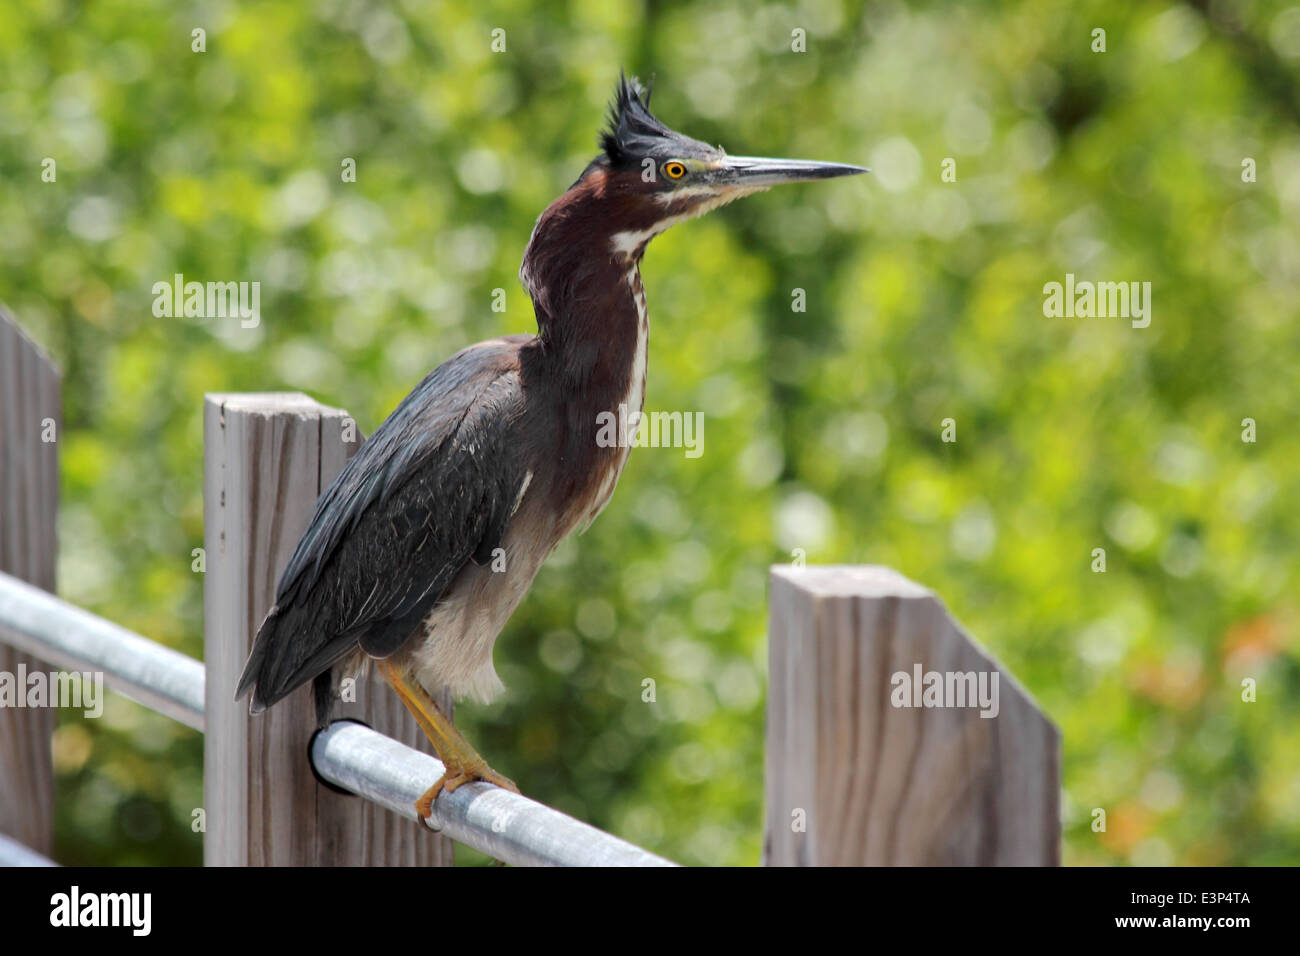 A Green Heron perched upon a railing overlooking a coastal marsh. Stock Photo